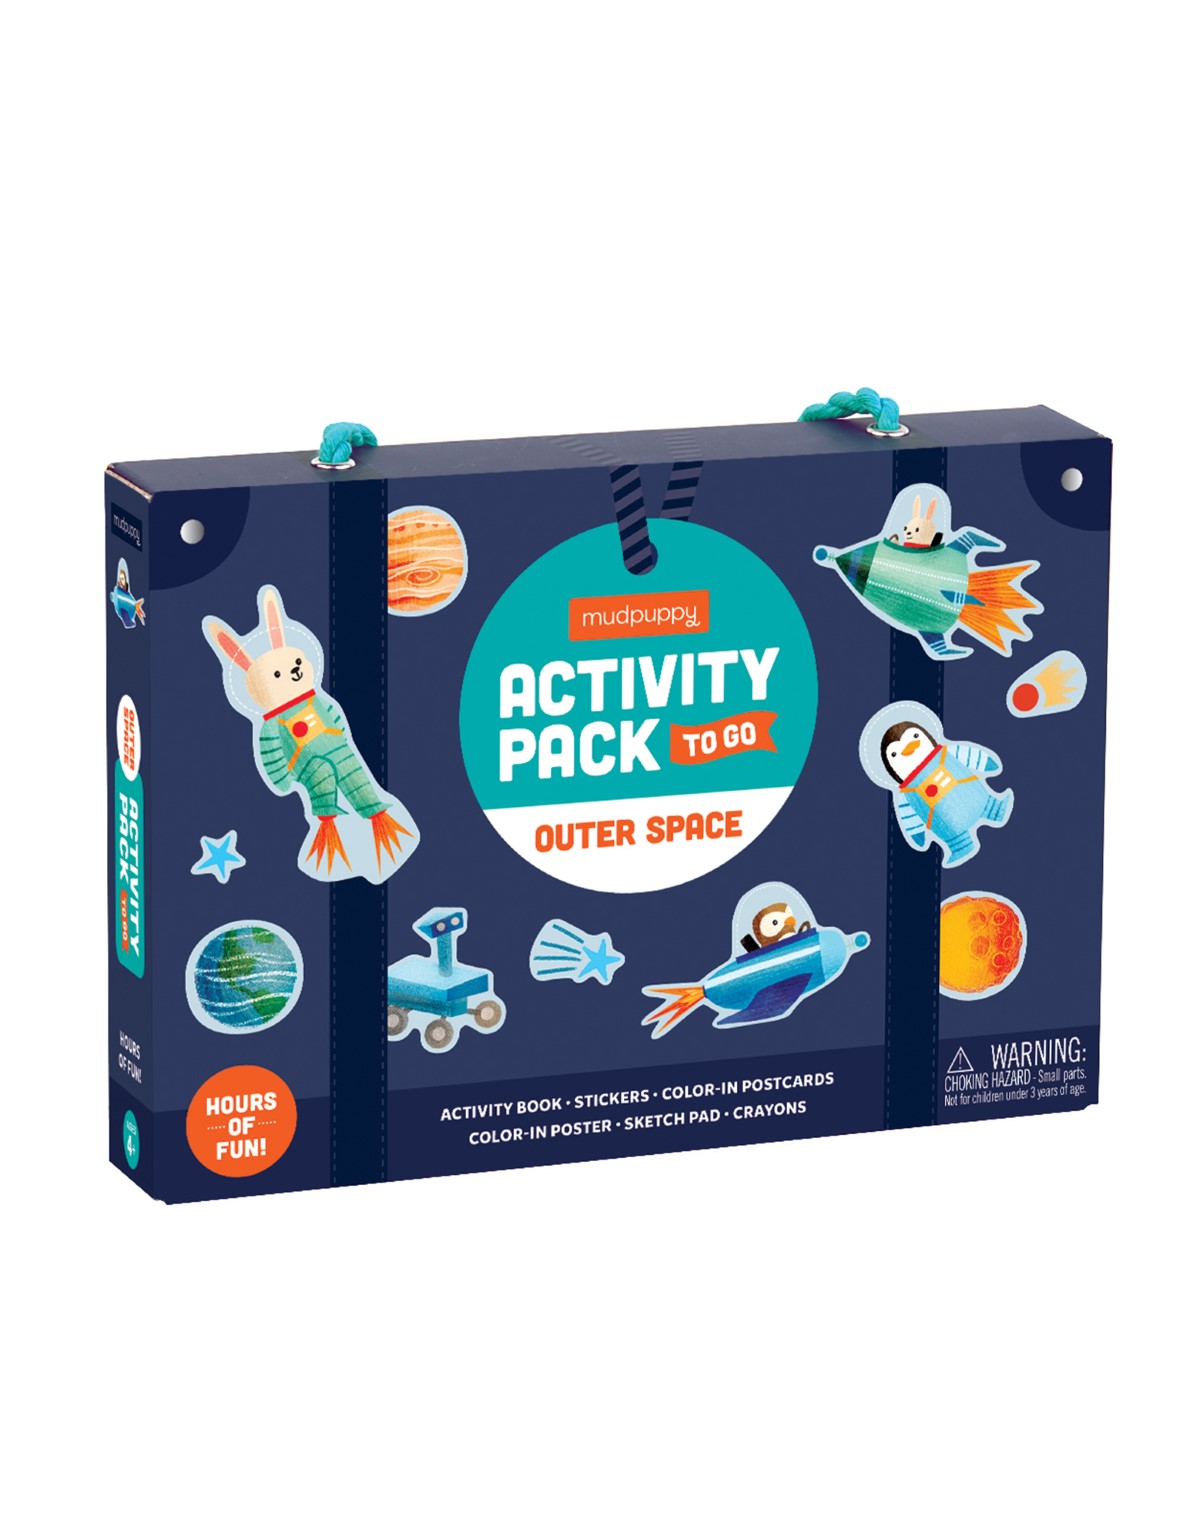 Mudpuppy Outer Space Activity Pack To Go